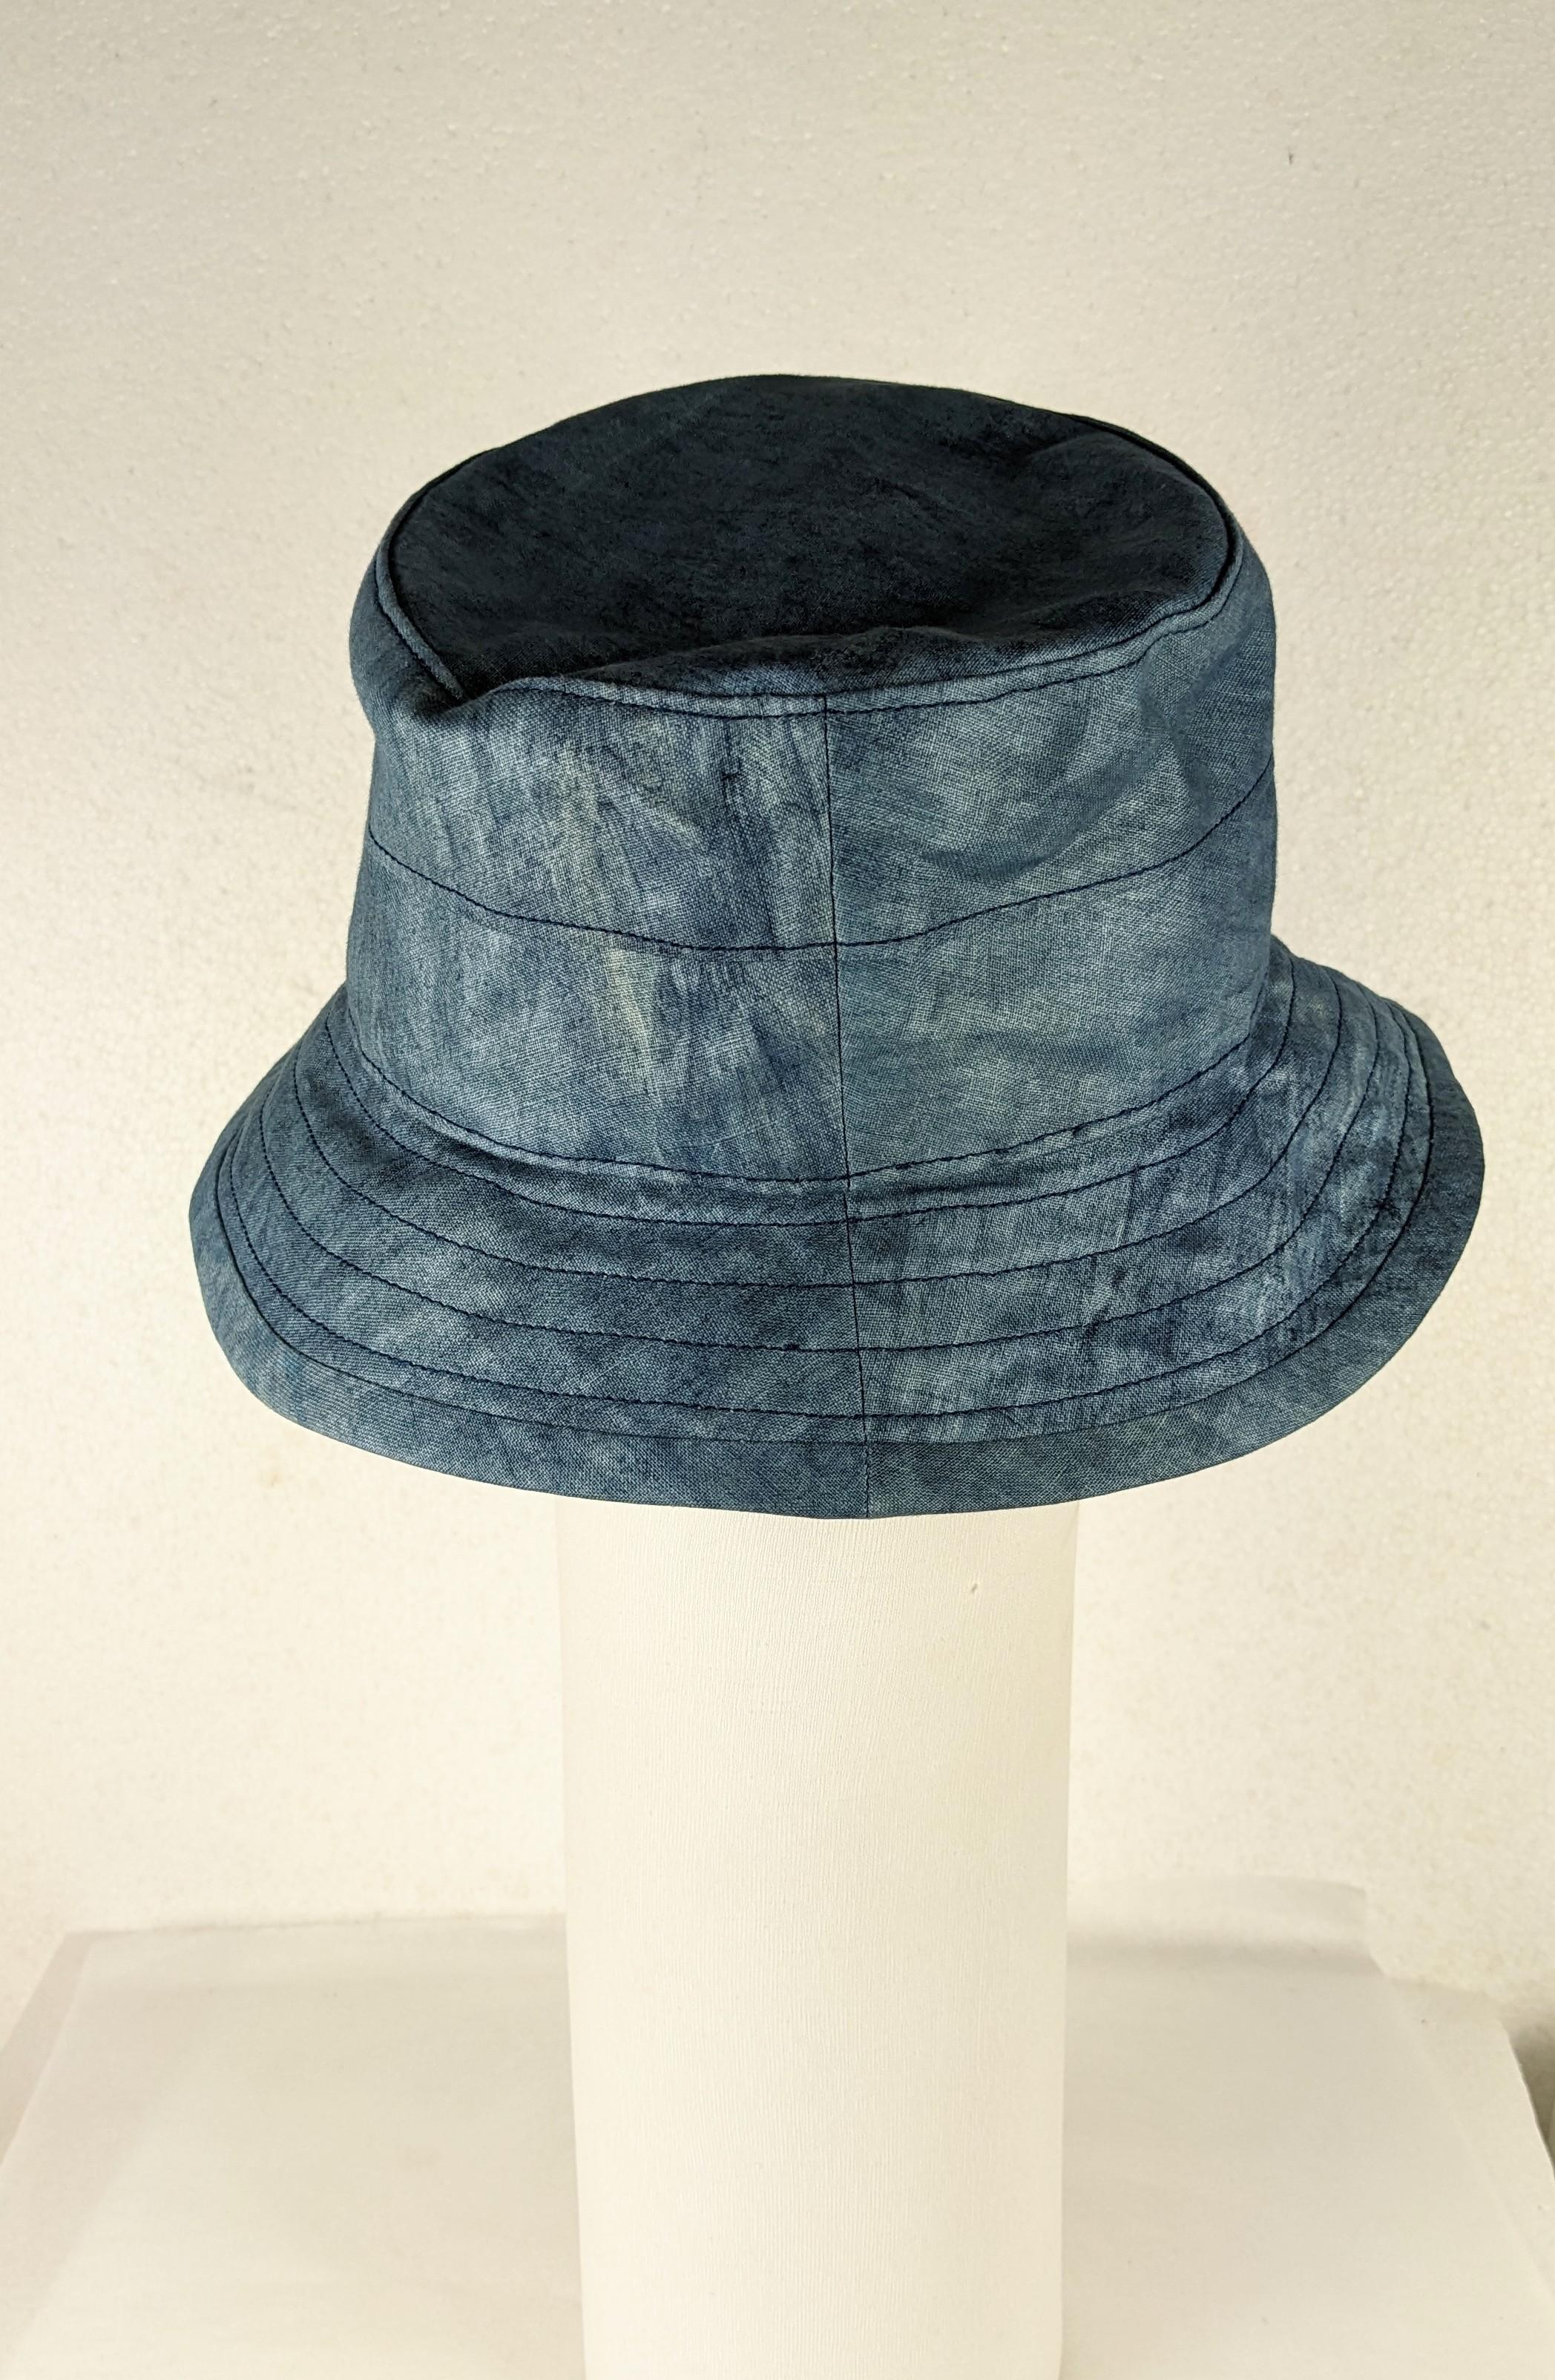 Givenchy Haute Couture Gardening Hat from Bunny Mellon's estate in a tie dyed denim blue lightweight cotton. Known for her love of gardening and flowers, she ordered these custom made Couture hats by the dozen. Super chic custom made hat for one of